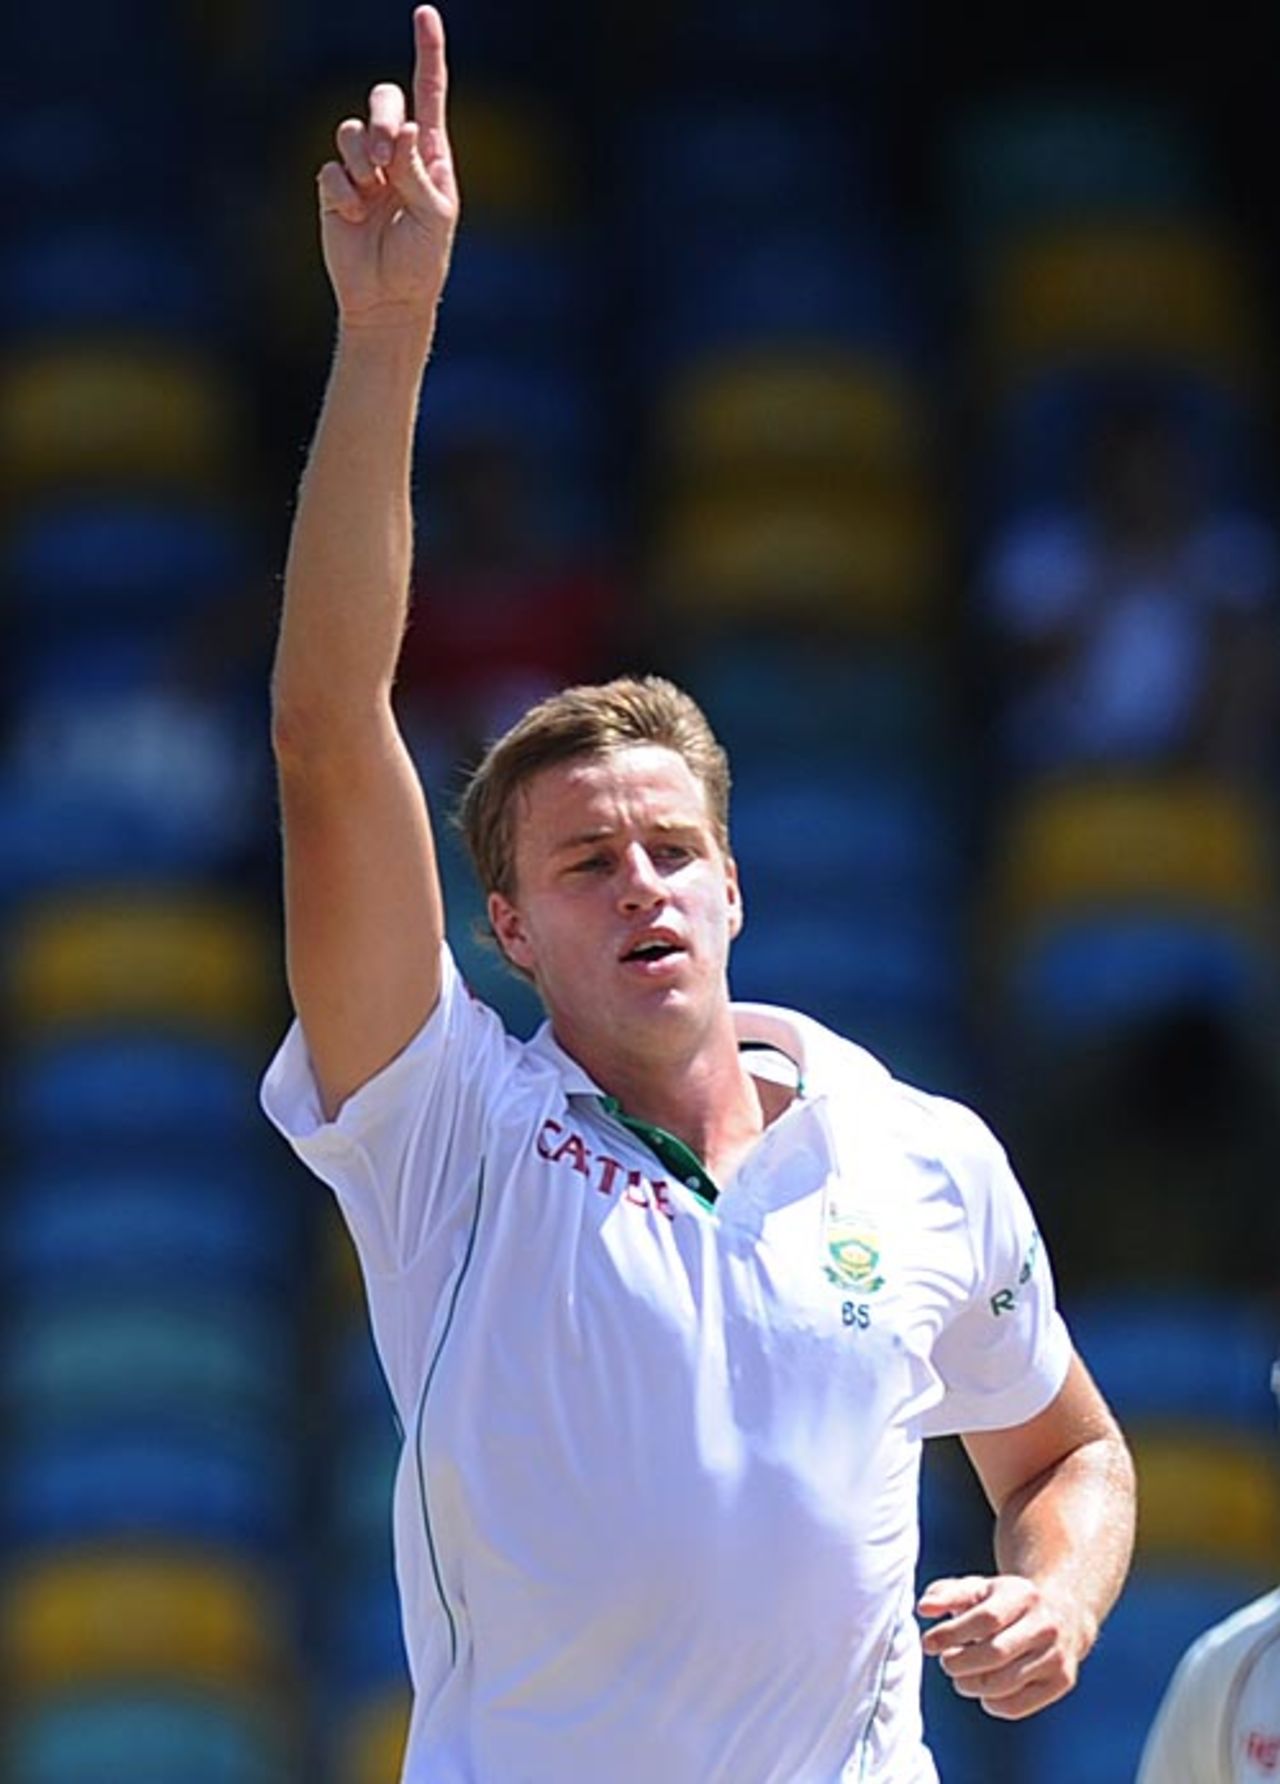 Morne Morkel finished off the tail quickly, West Indies v South Africa, 3rd Test, Barbados, 4th day, June 29, 2010 